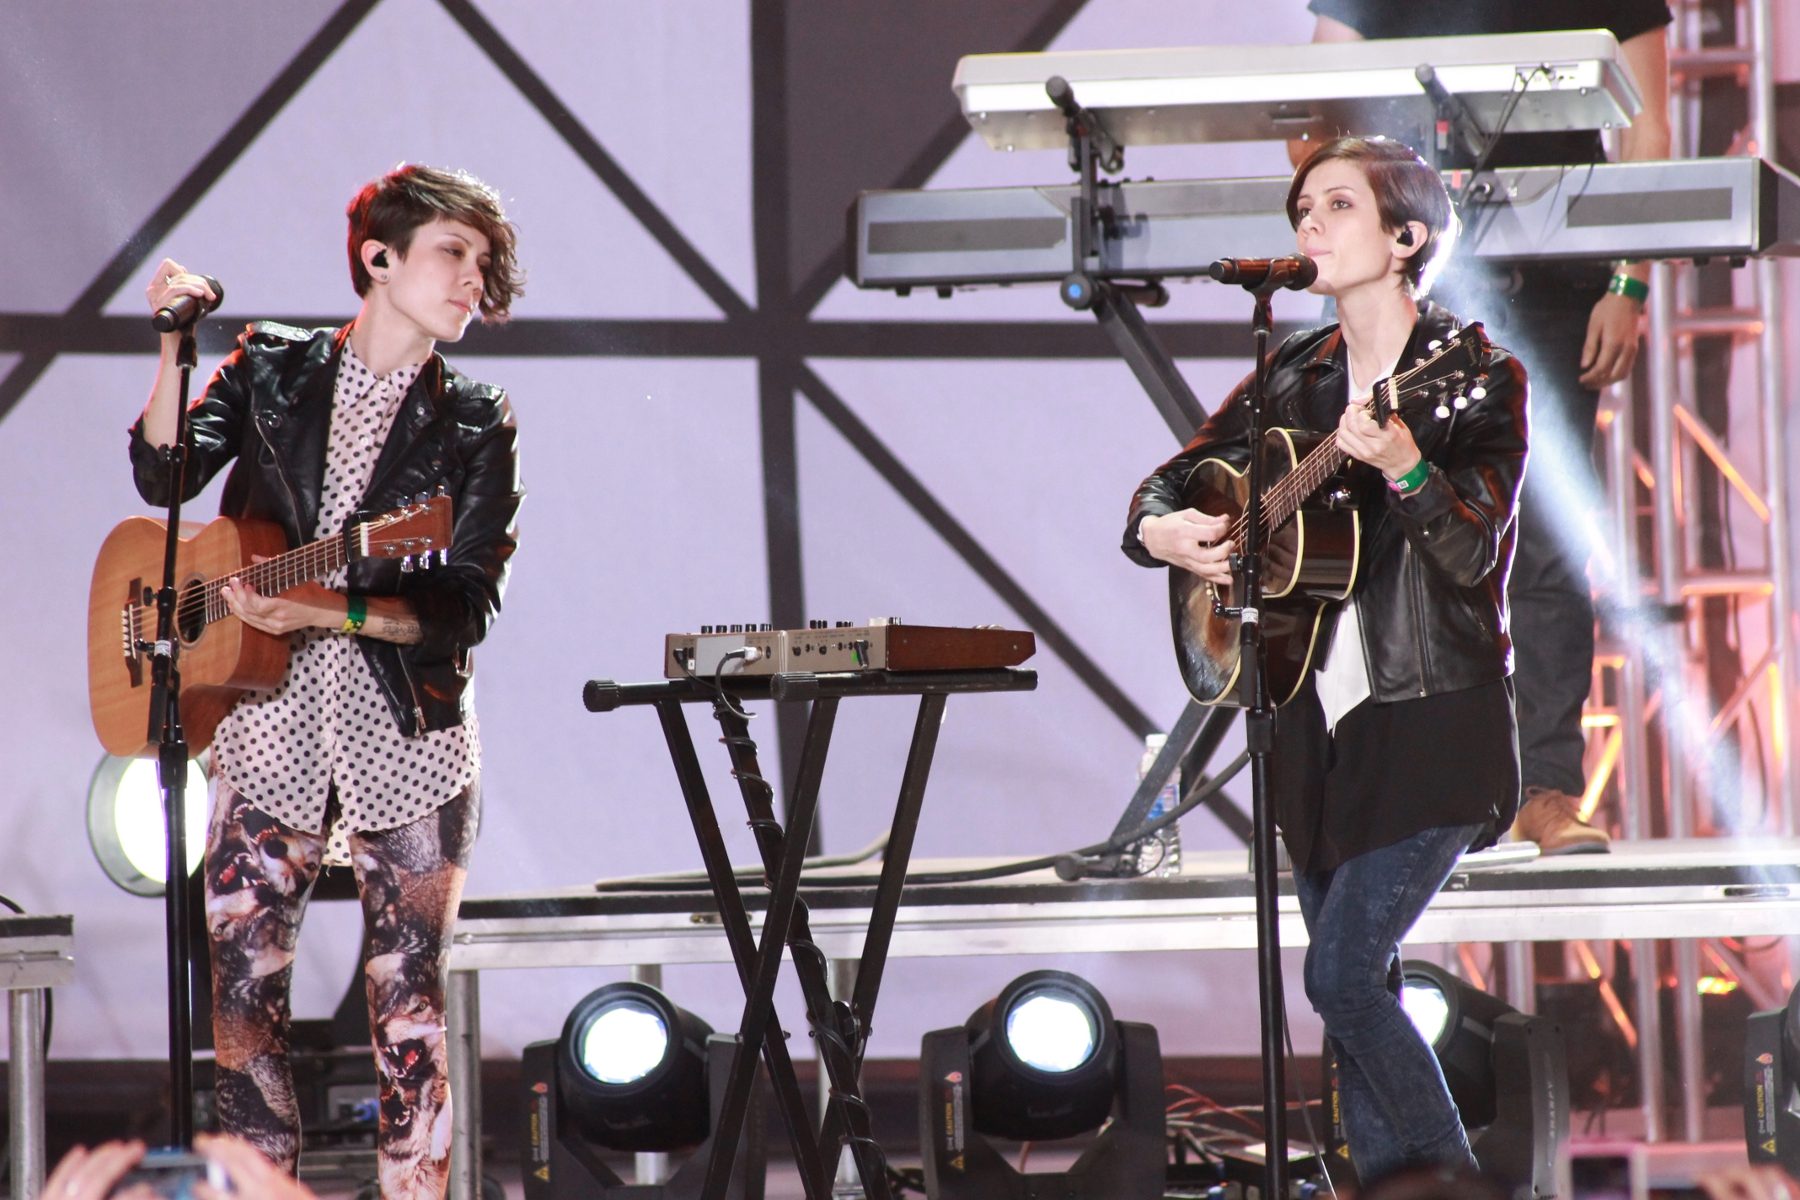 Tegan And Sara Show Us How To Make A Music Video For Upbeat New Single “F*****g Up What Matters”